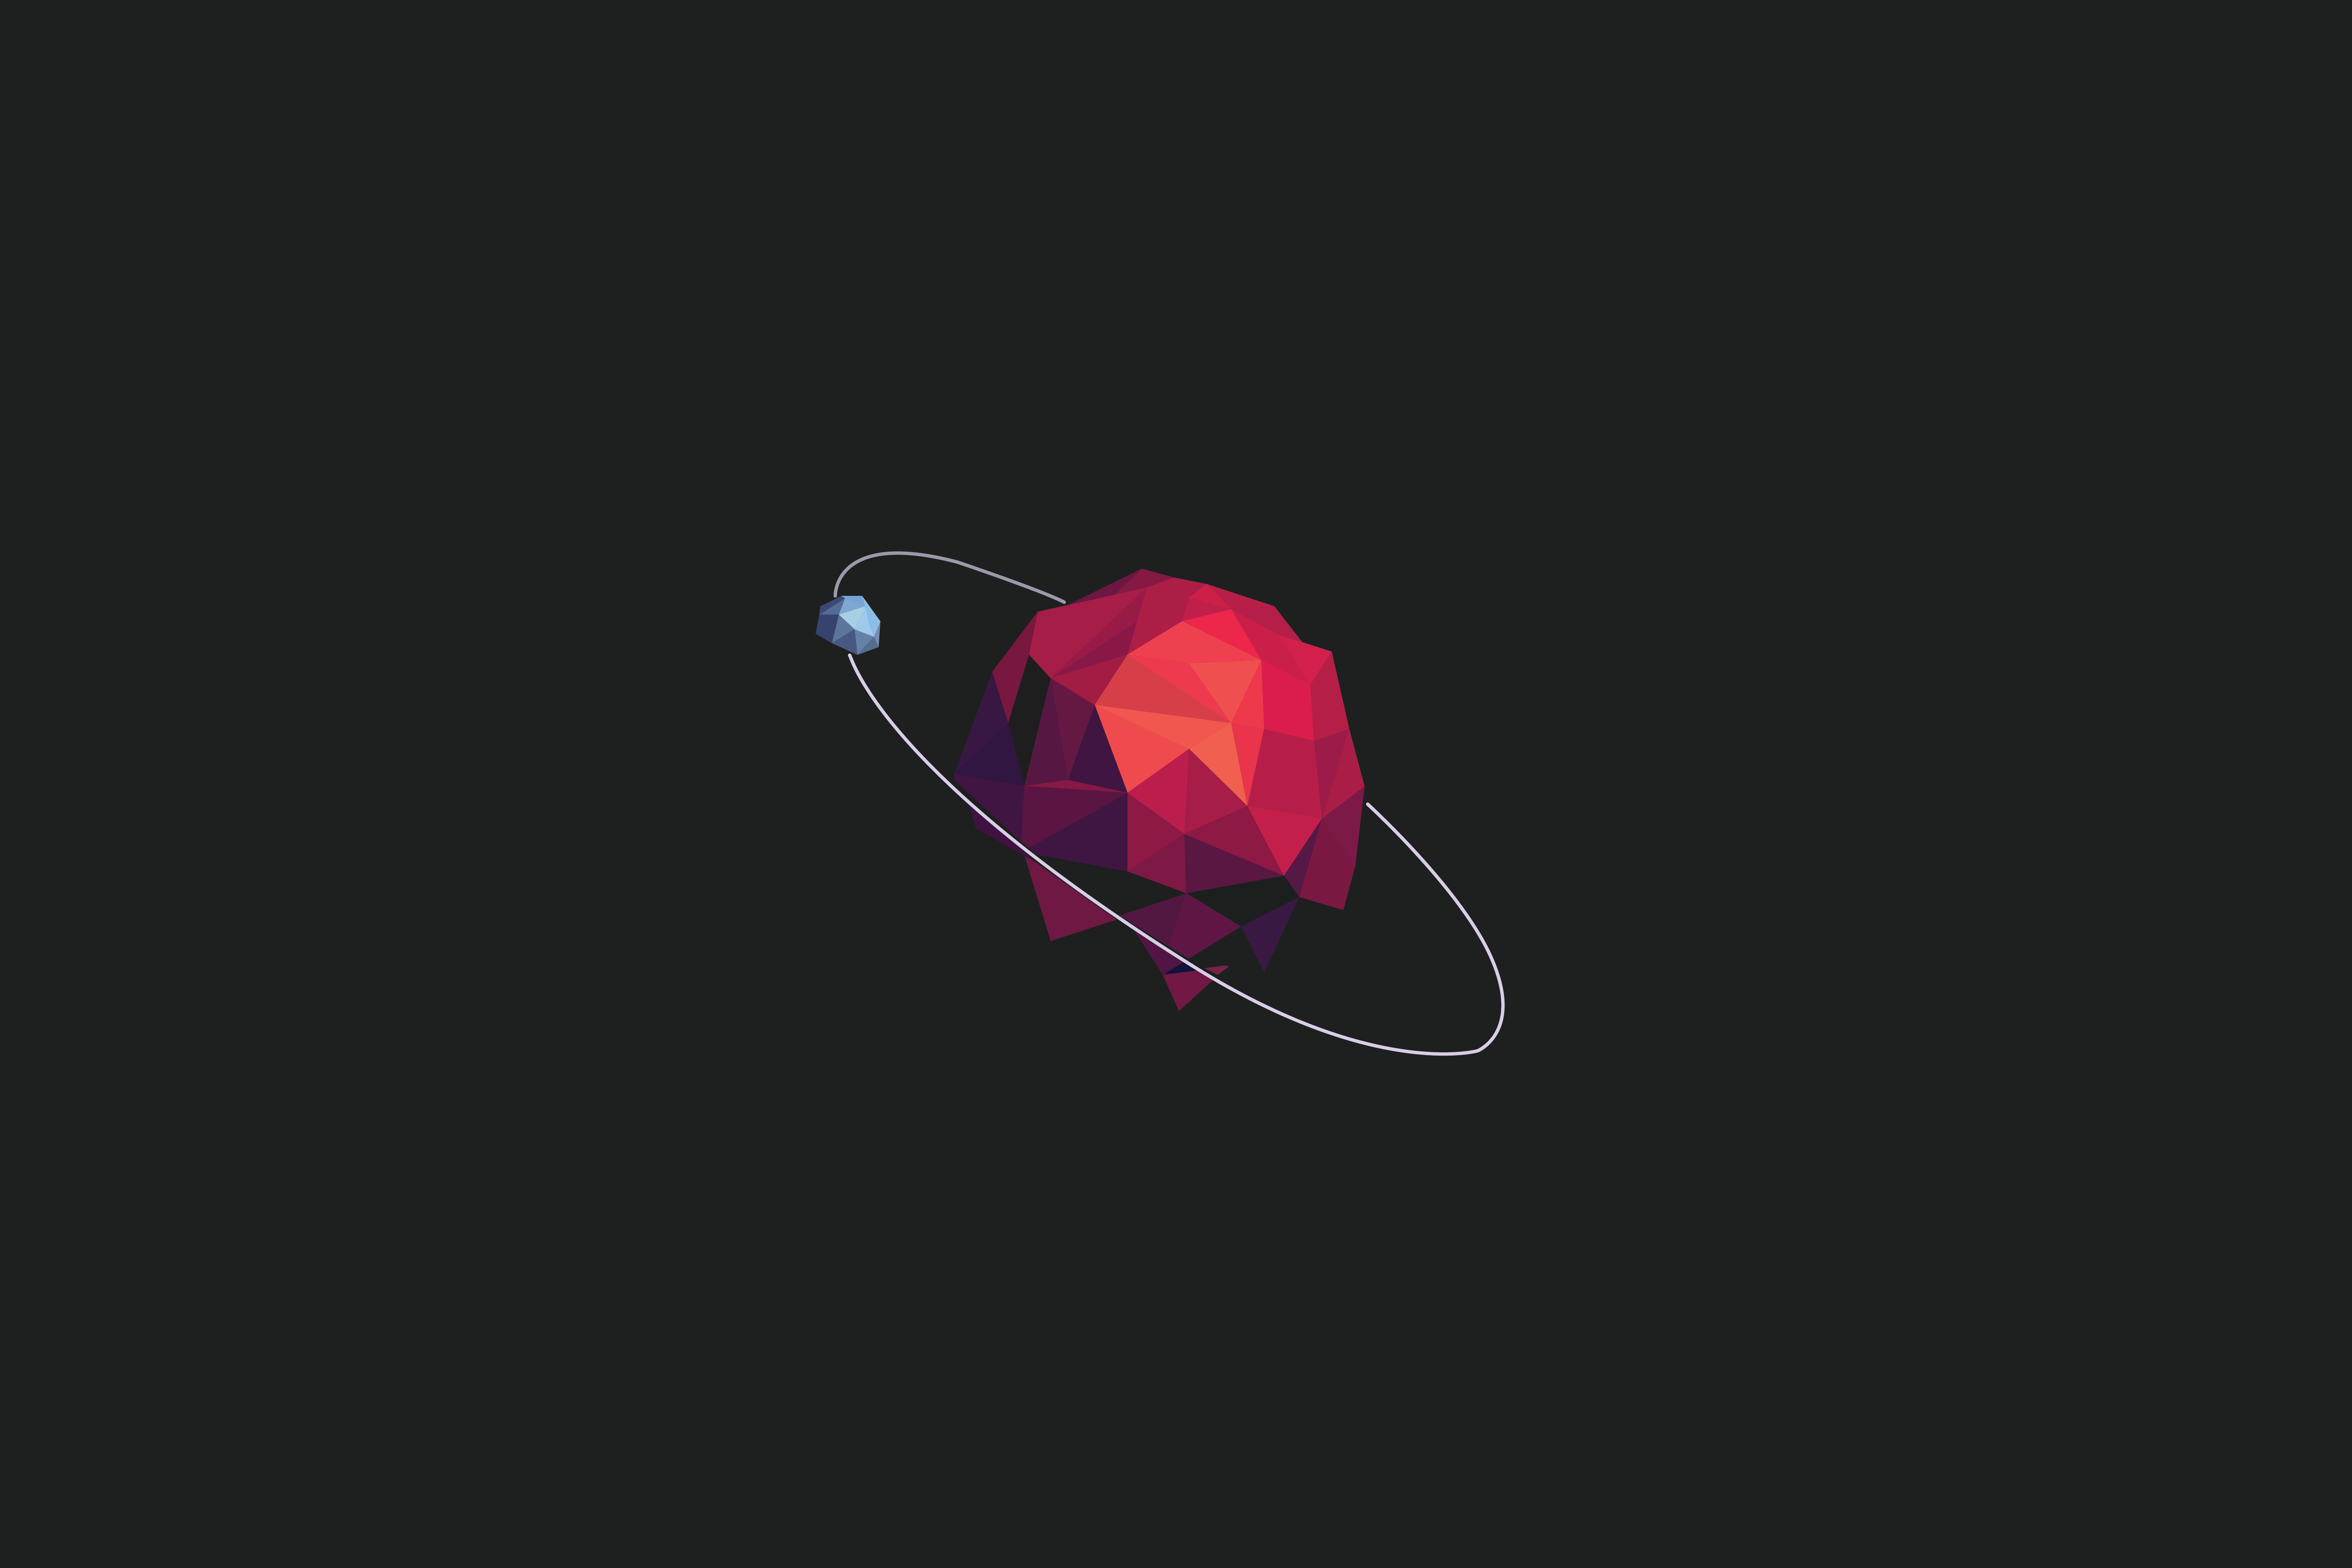 Vectorized Low Poly Planet And Her Moon (2736x1824)